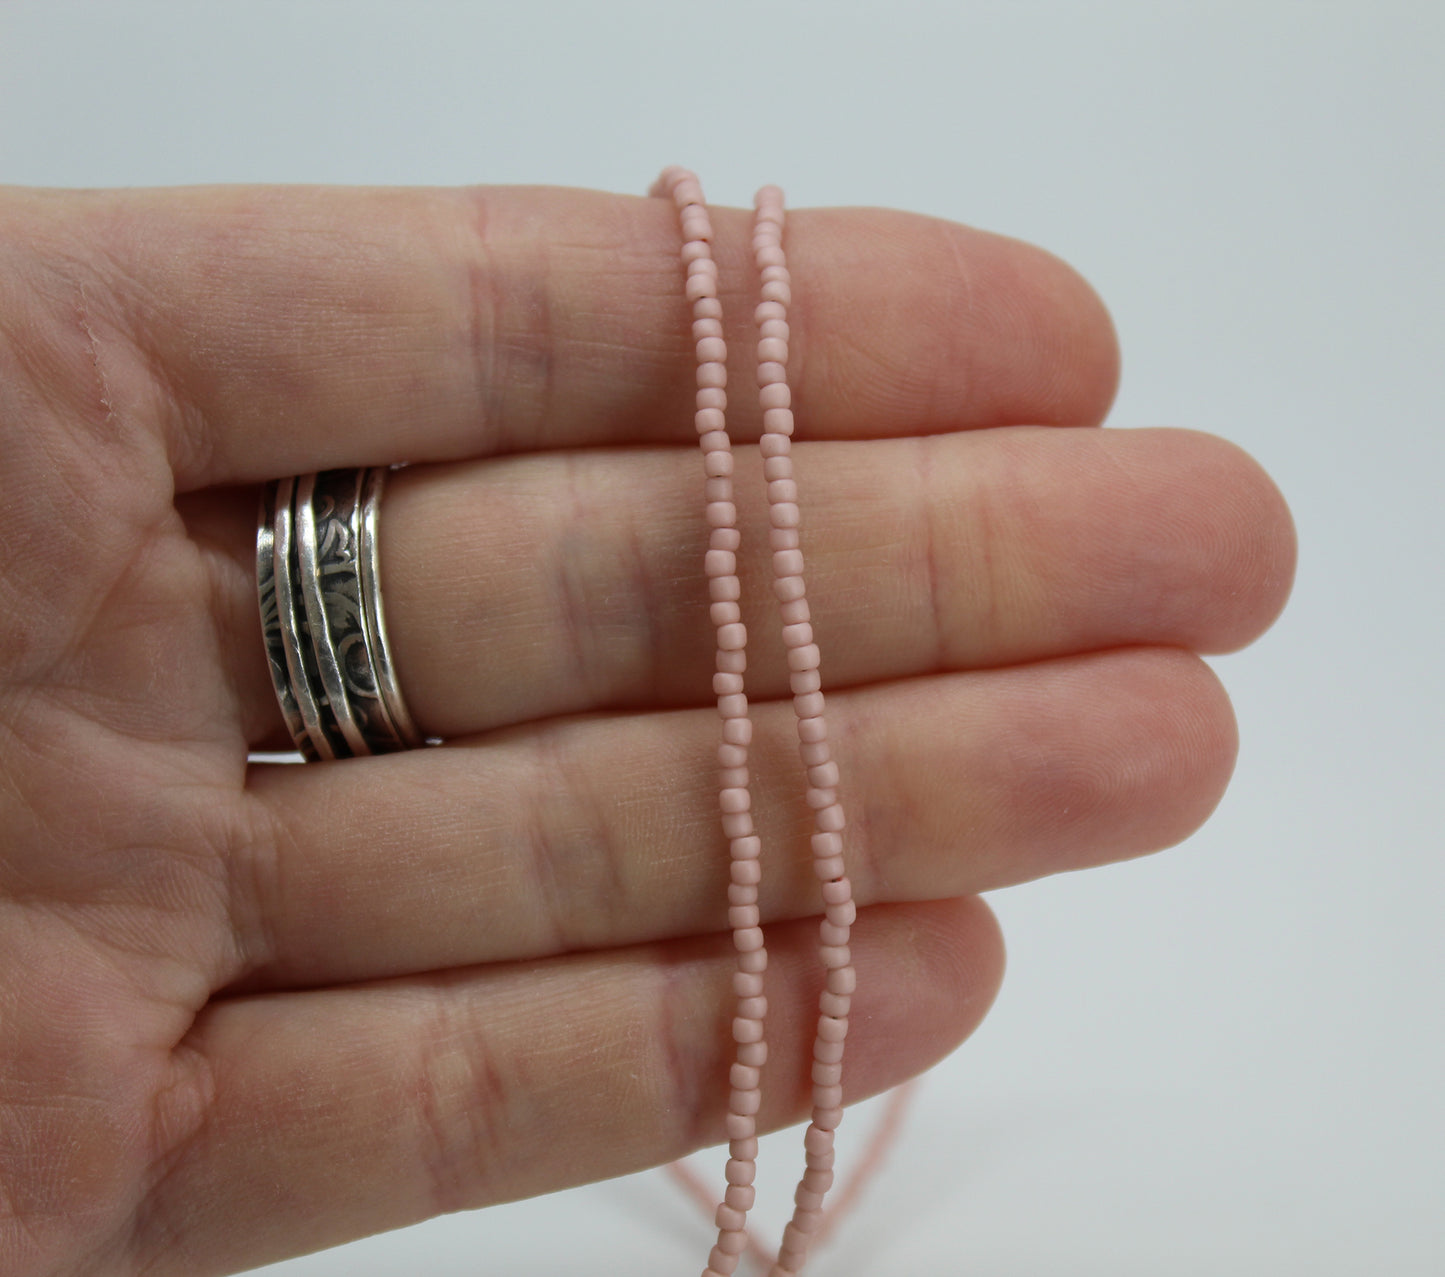 Pastel Pink Single Strand Seed Bead Necklace, Tiny 2.2mm Opaque Pale Pink Beaded Necklace, Made to Order Choker to Long Lengths